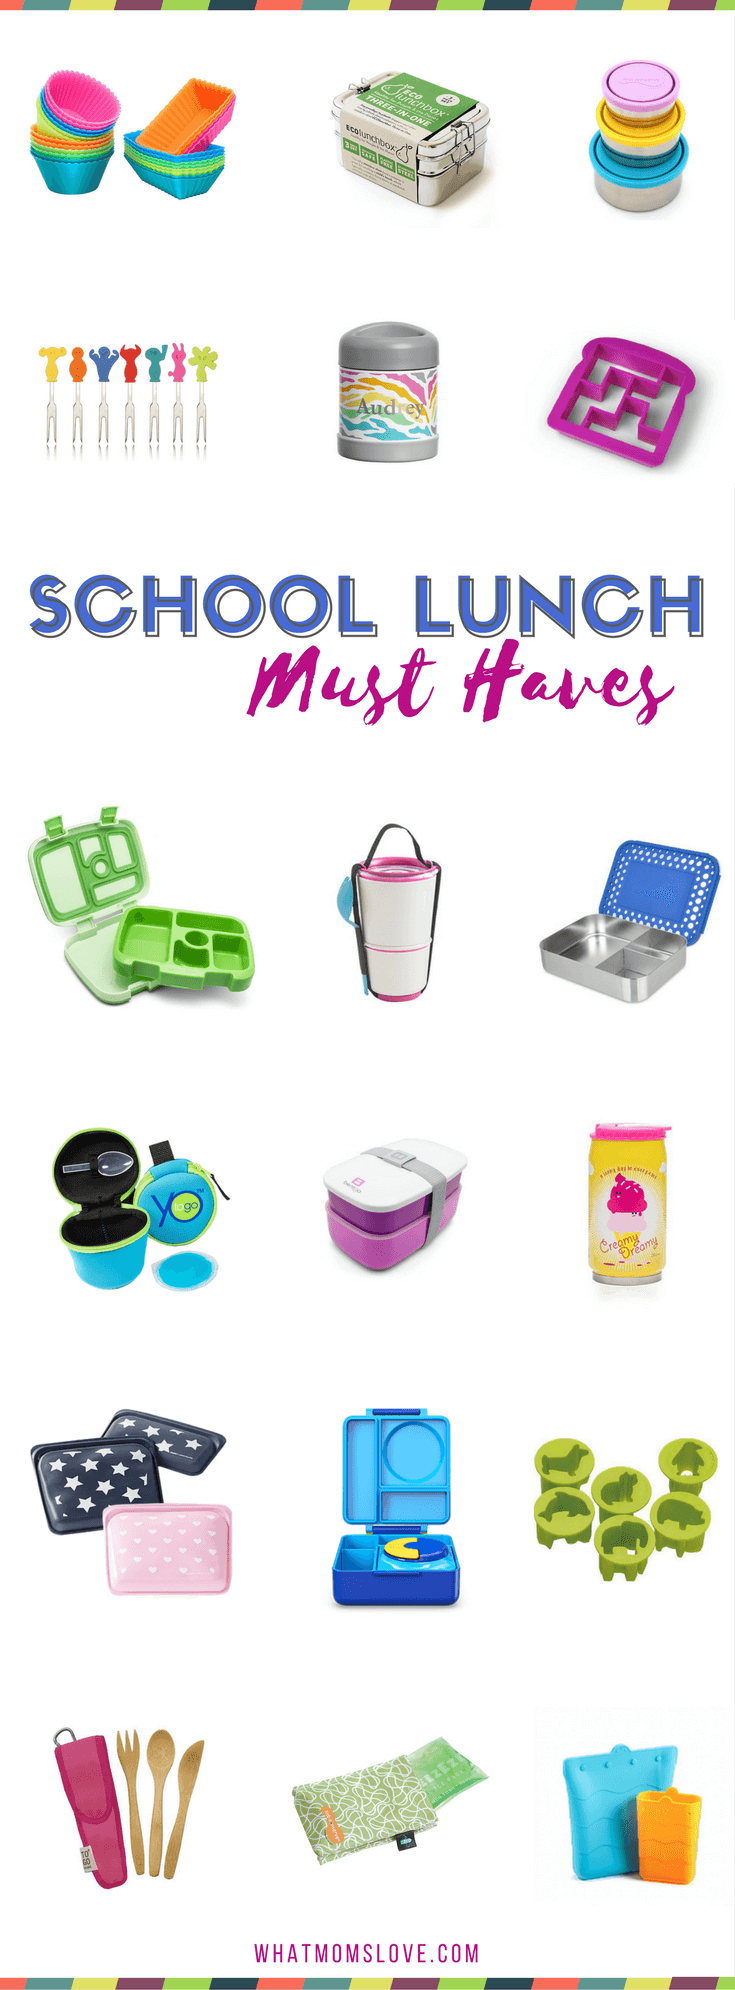 Back to School Lunch Box Ideas for Kids | Best Bento Box containers, stainless steel products, supplies and tools | Say goodbye to tupperware and hello to fun supplies that will help you pack fun, healthy school lunches for picky eaters, kindergartners, grade schoolers and teens.